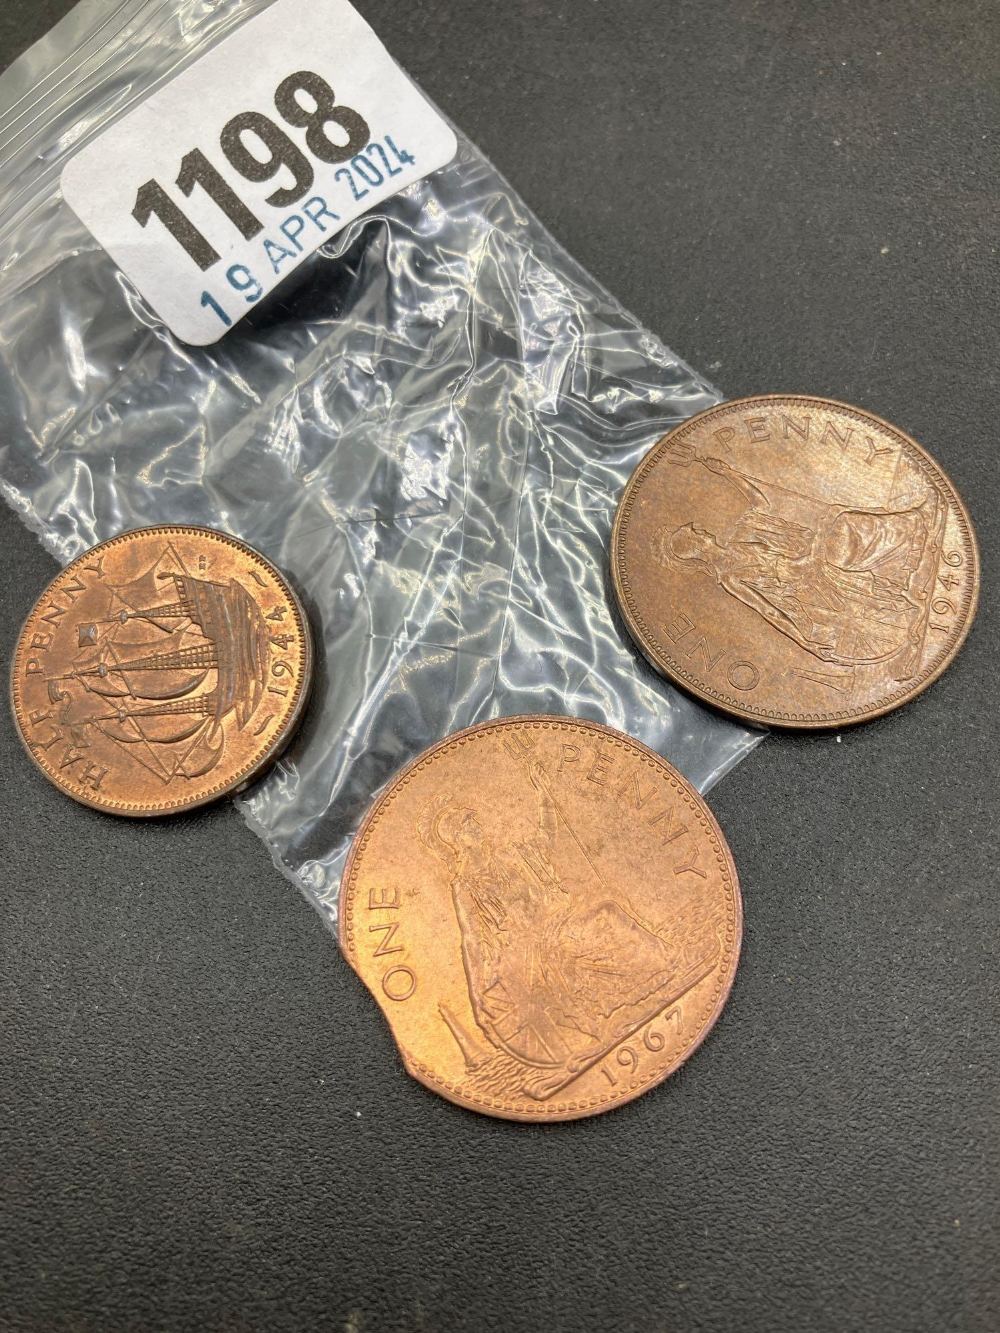 Miss struck 1967 penny and 2 old coins - Image 2 of 2